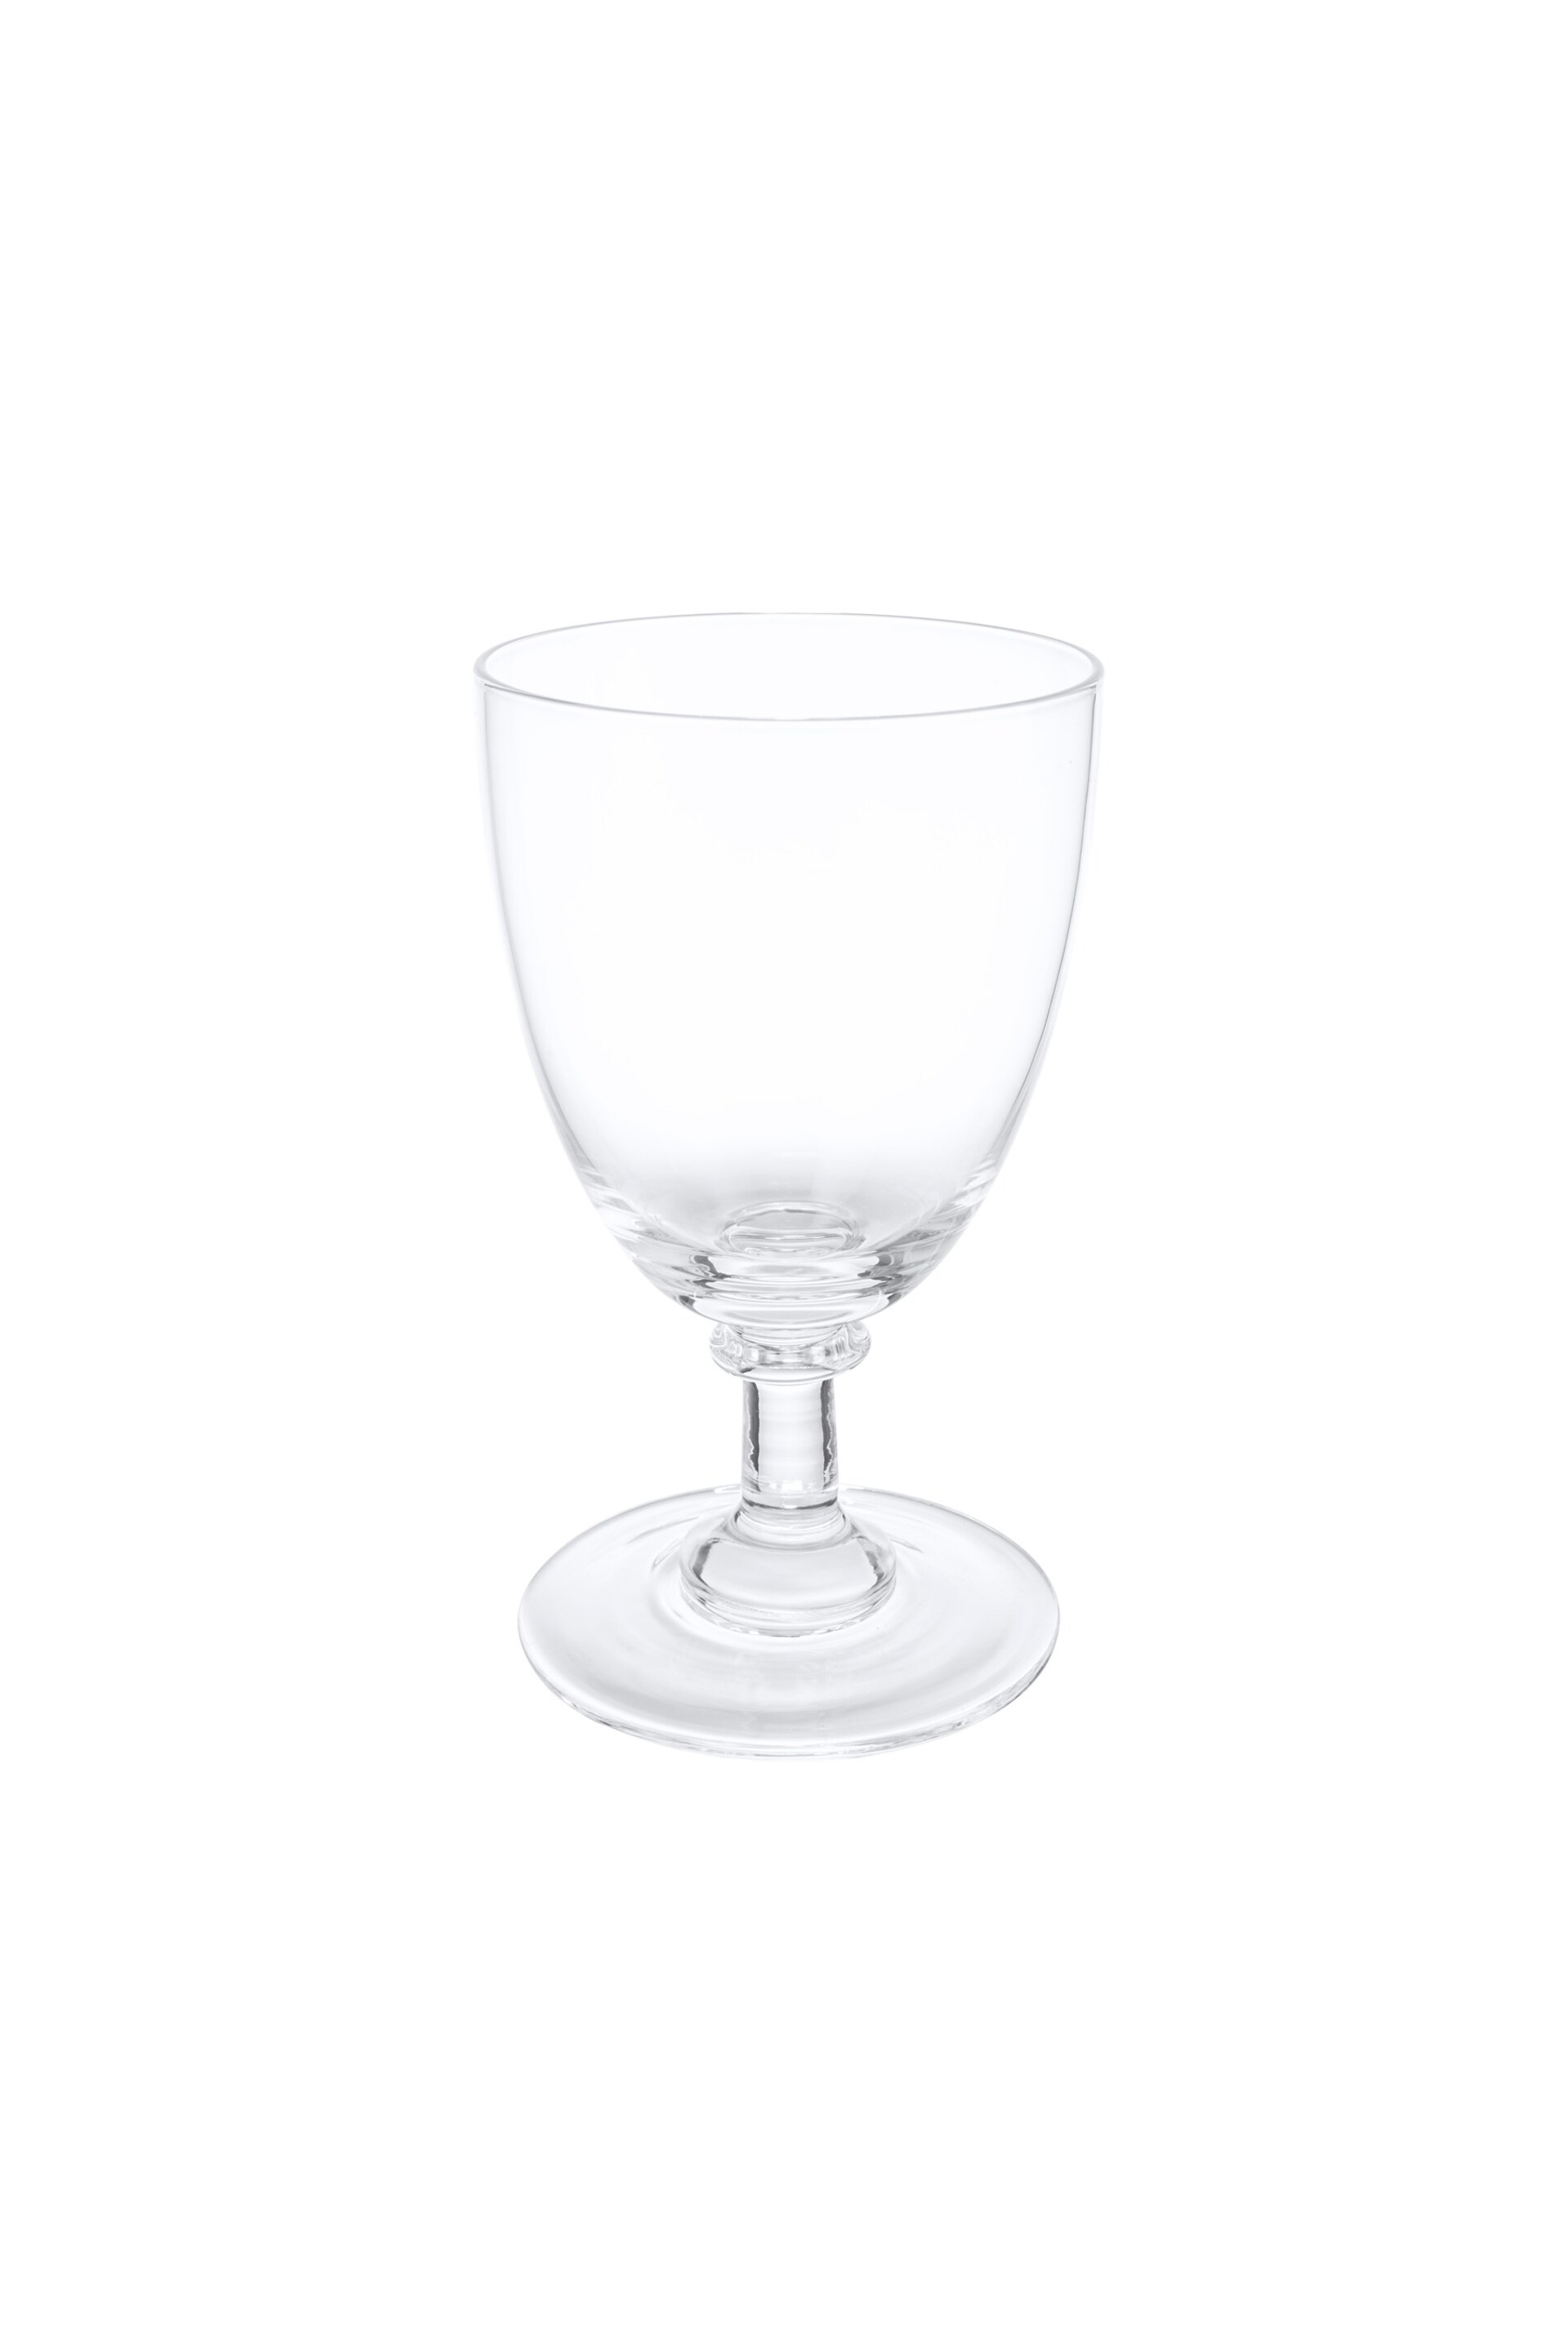 Mary Berry Set of 4 Clear Signature White Wine Glasses - Image 3 of 4